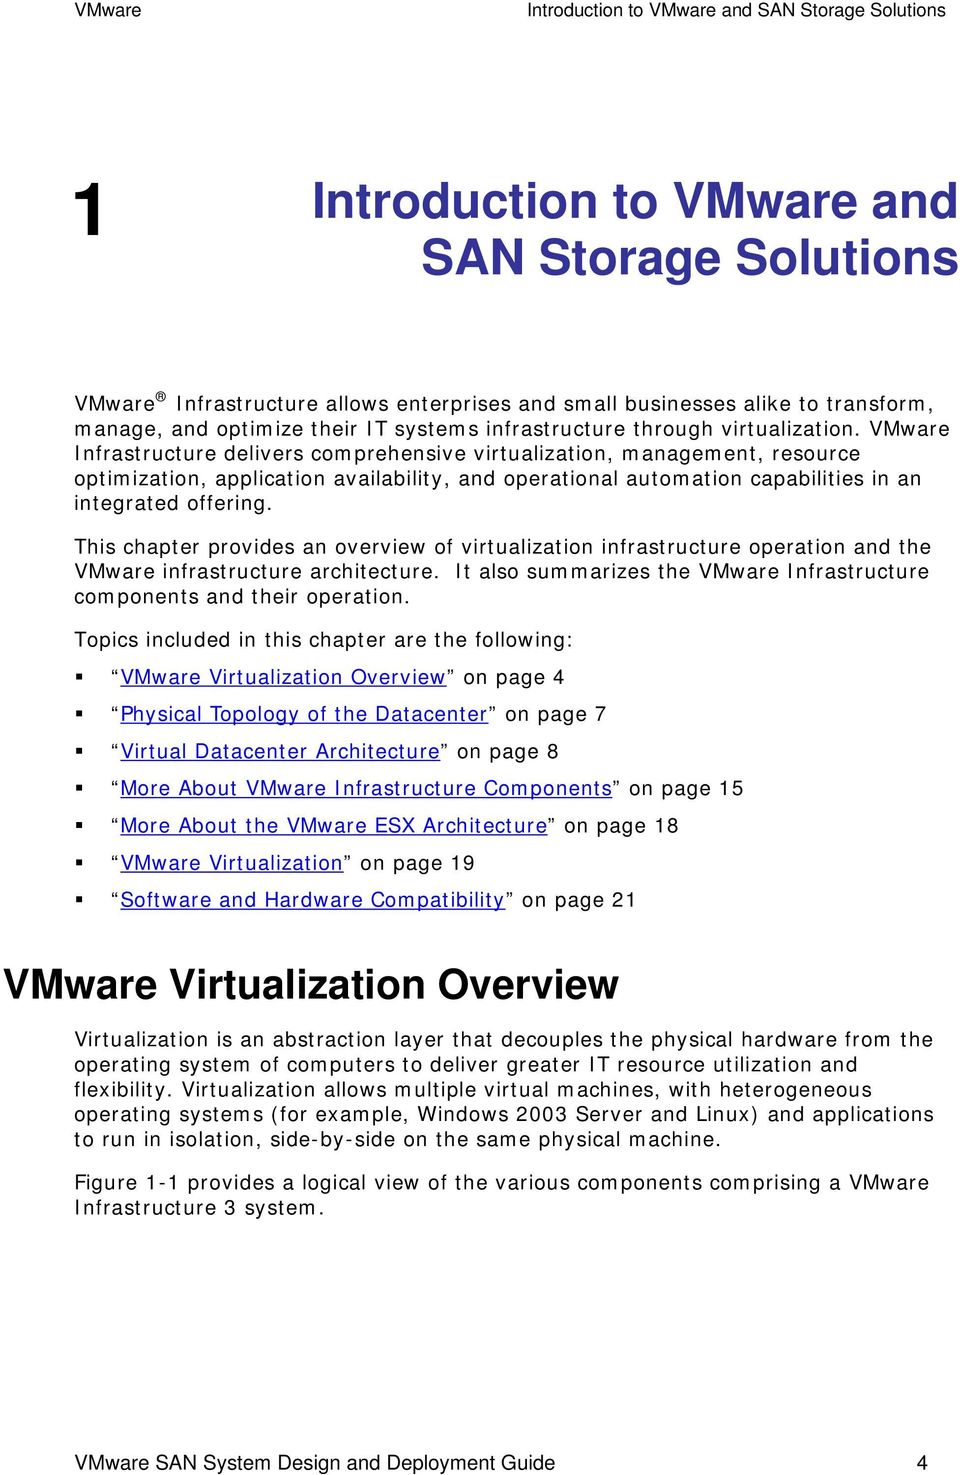 VMware Infrastructure delivers comprehensive virtualization, management, resource optimization, application availability, and operational automation capabilities in an integrated offering.